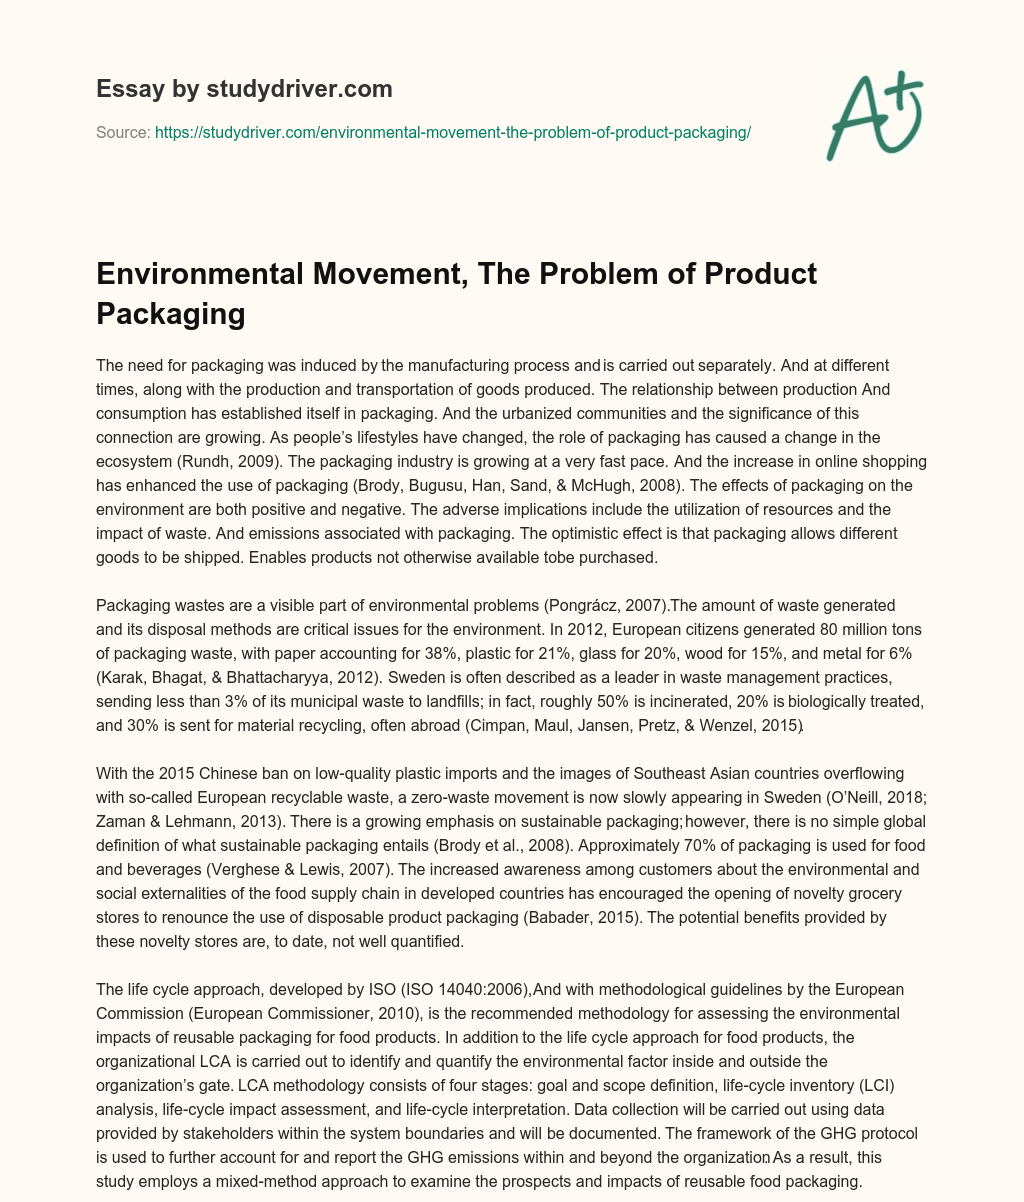 Environmental Movement, the Problem of Product Packaging essay